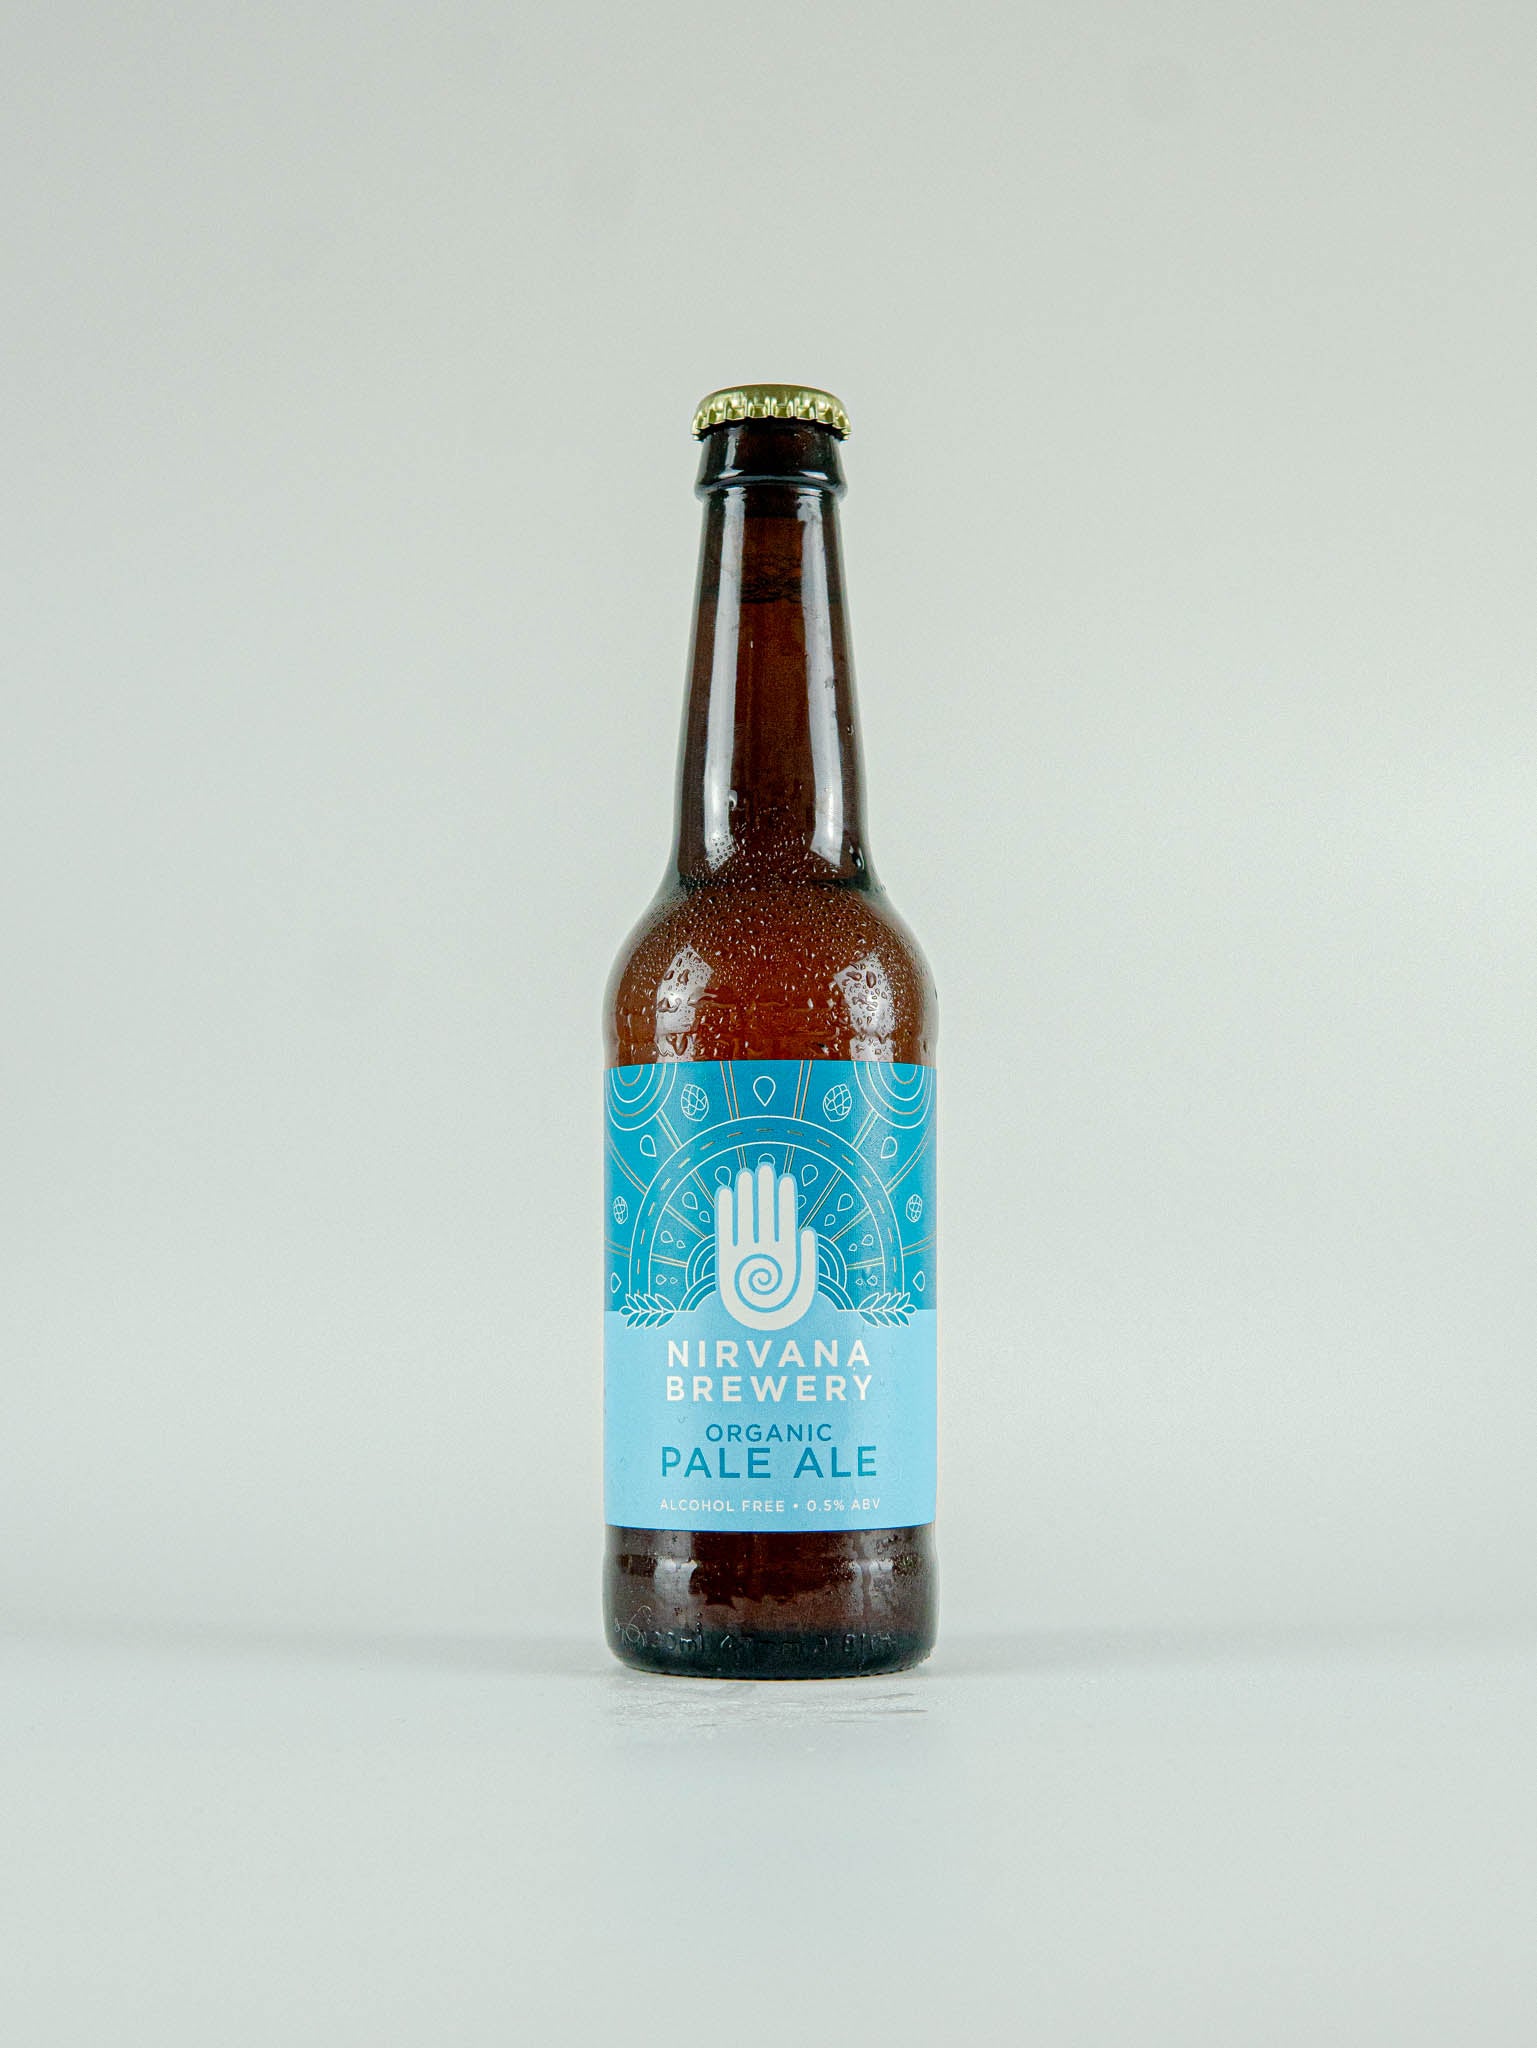 Nirvana Brewery Organic Pale Ale Low Alcohol Mantra 0.5% - LightDrinks